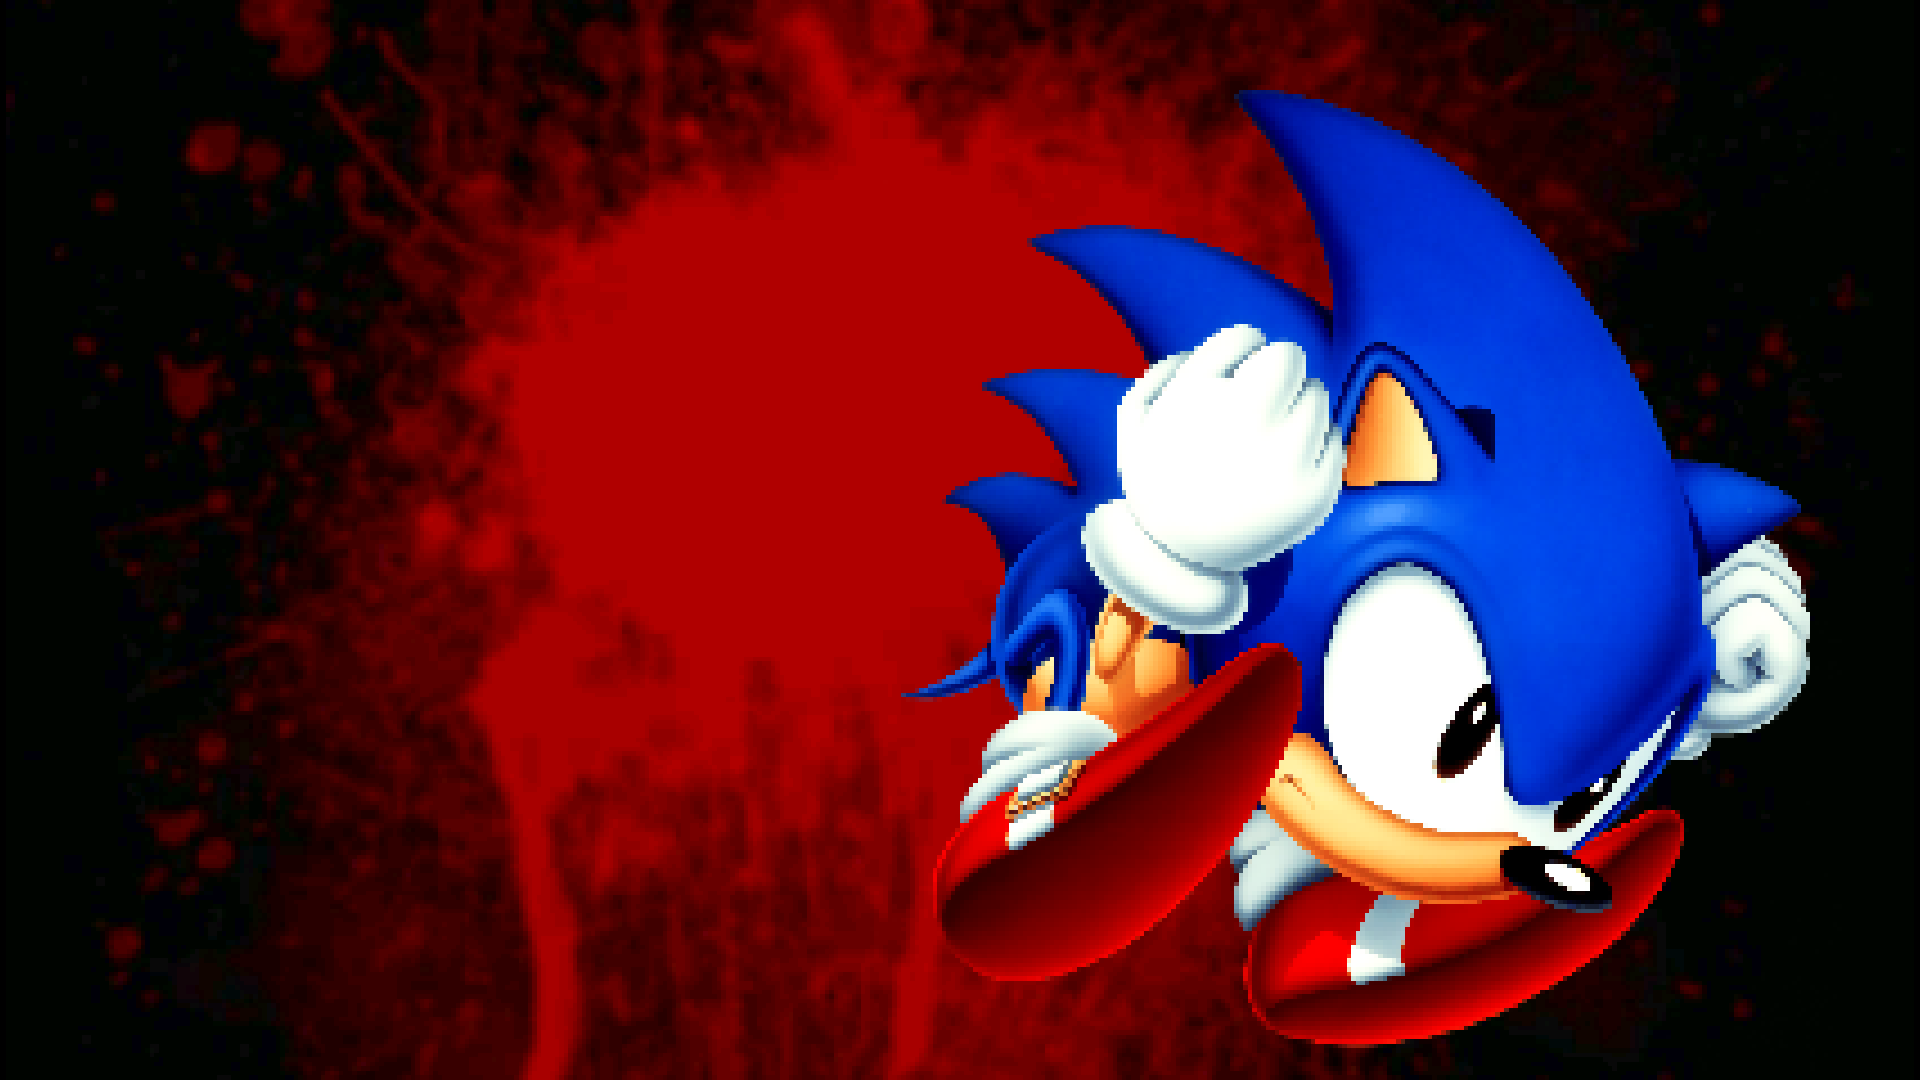 Sonic.EXE Forever by Sonic's Gaming Hub